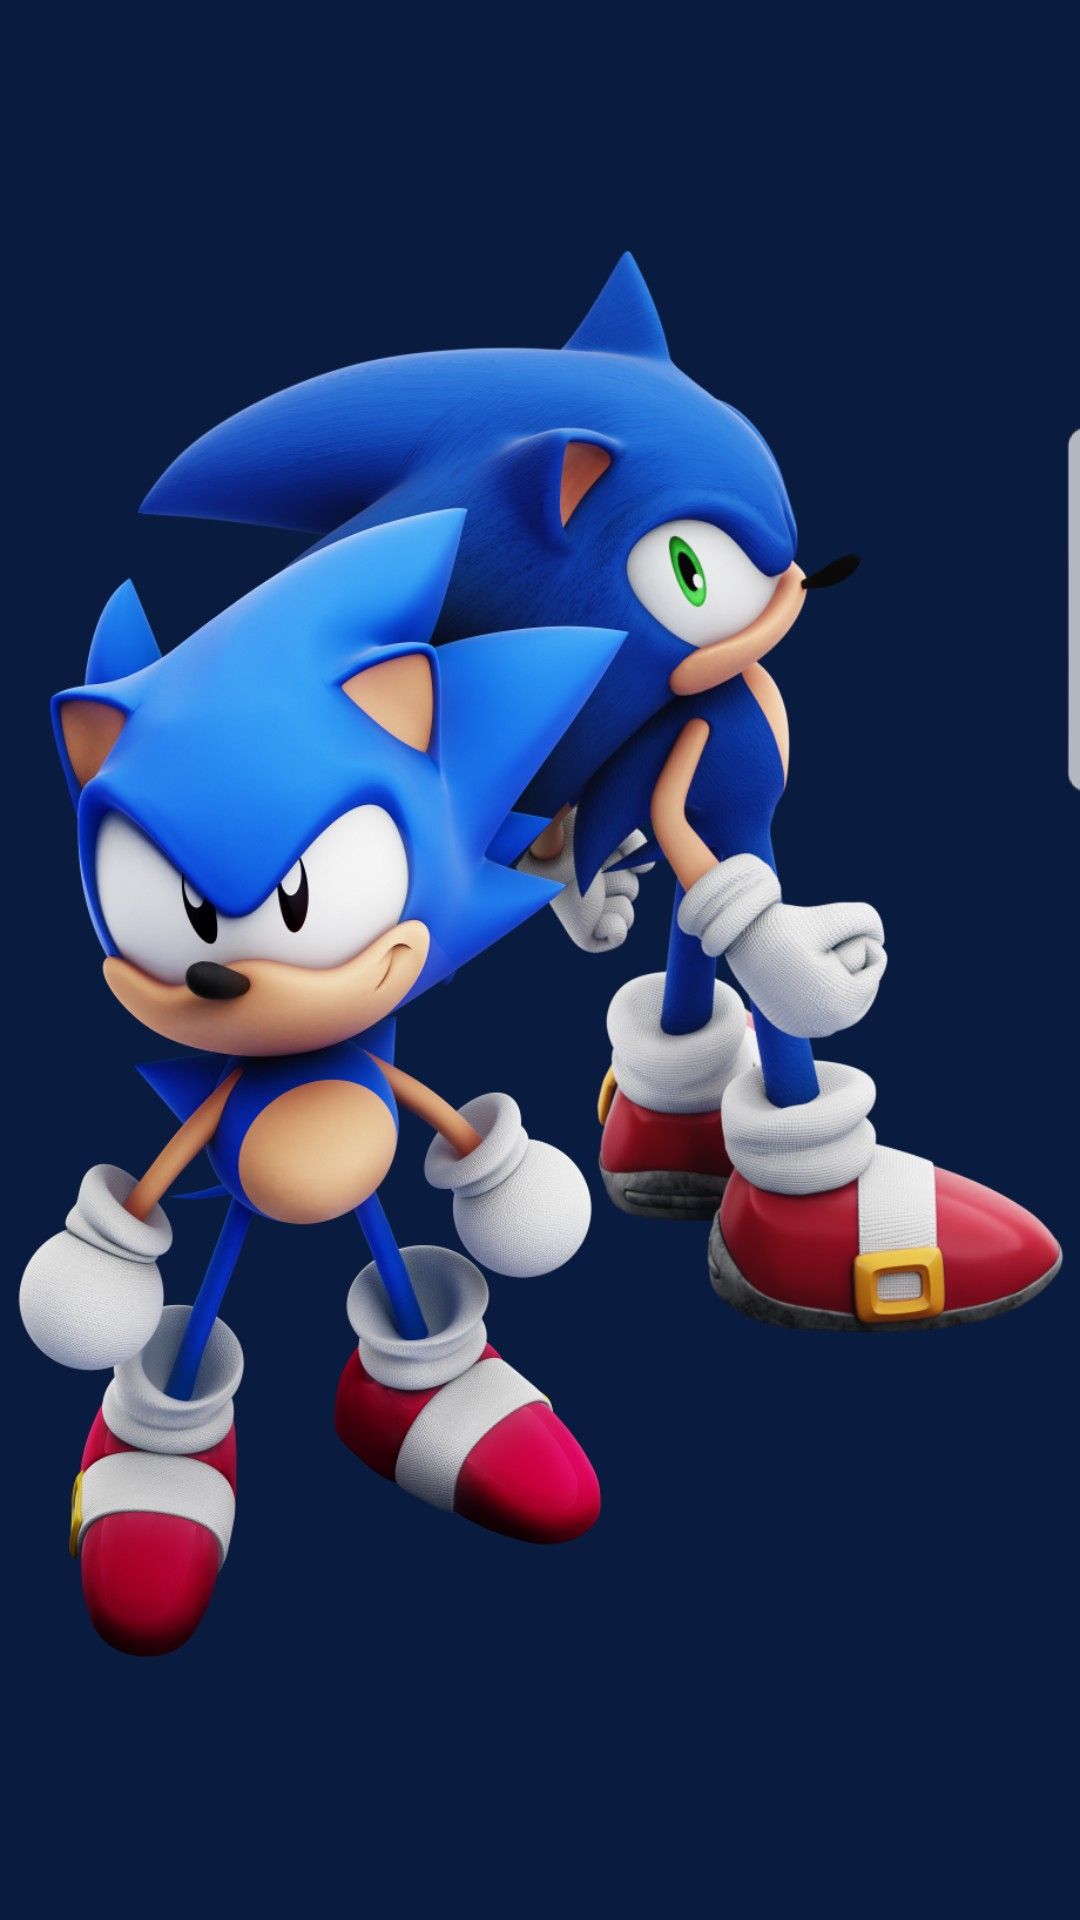 Modern Sonic The Hedgehog Wallpapers - Wallpaper Cave